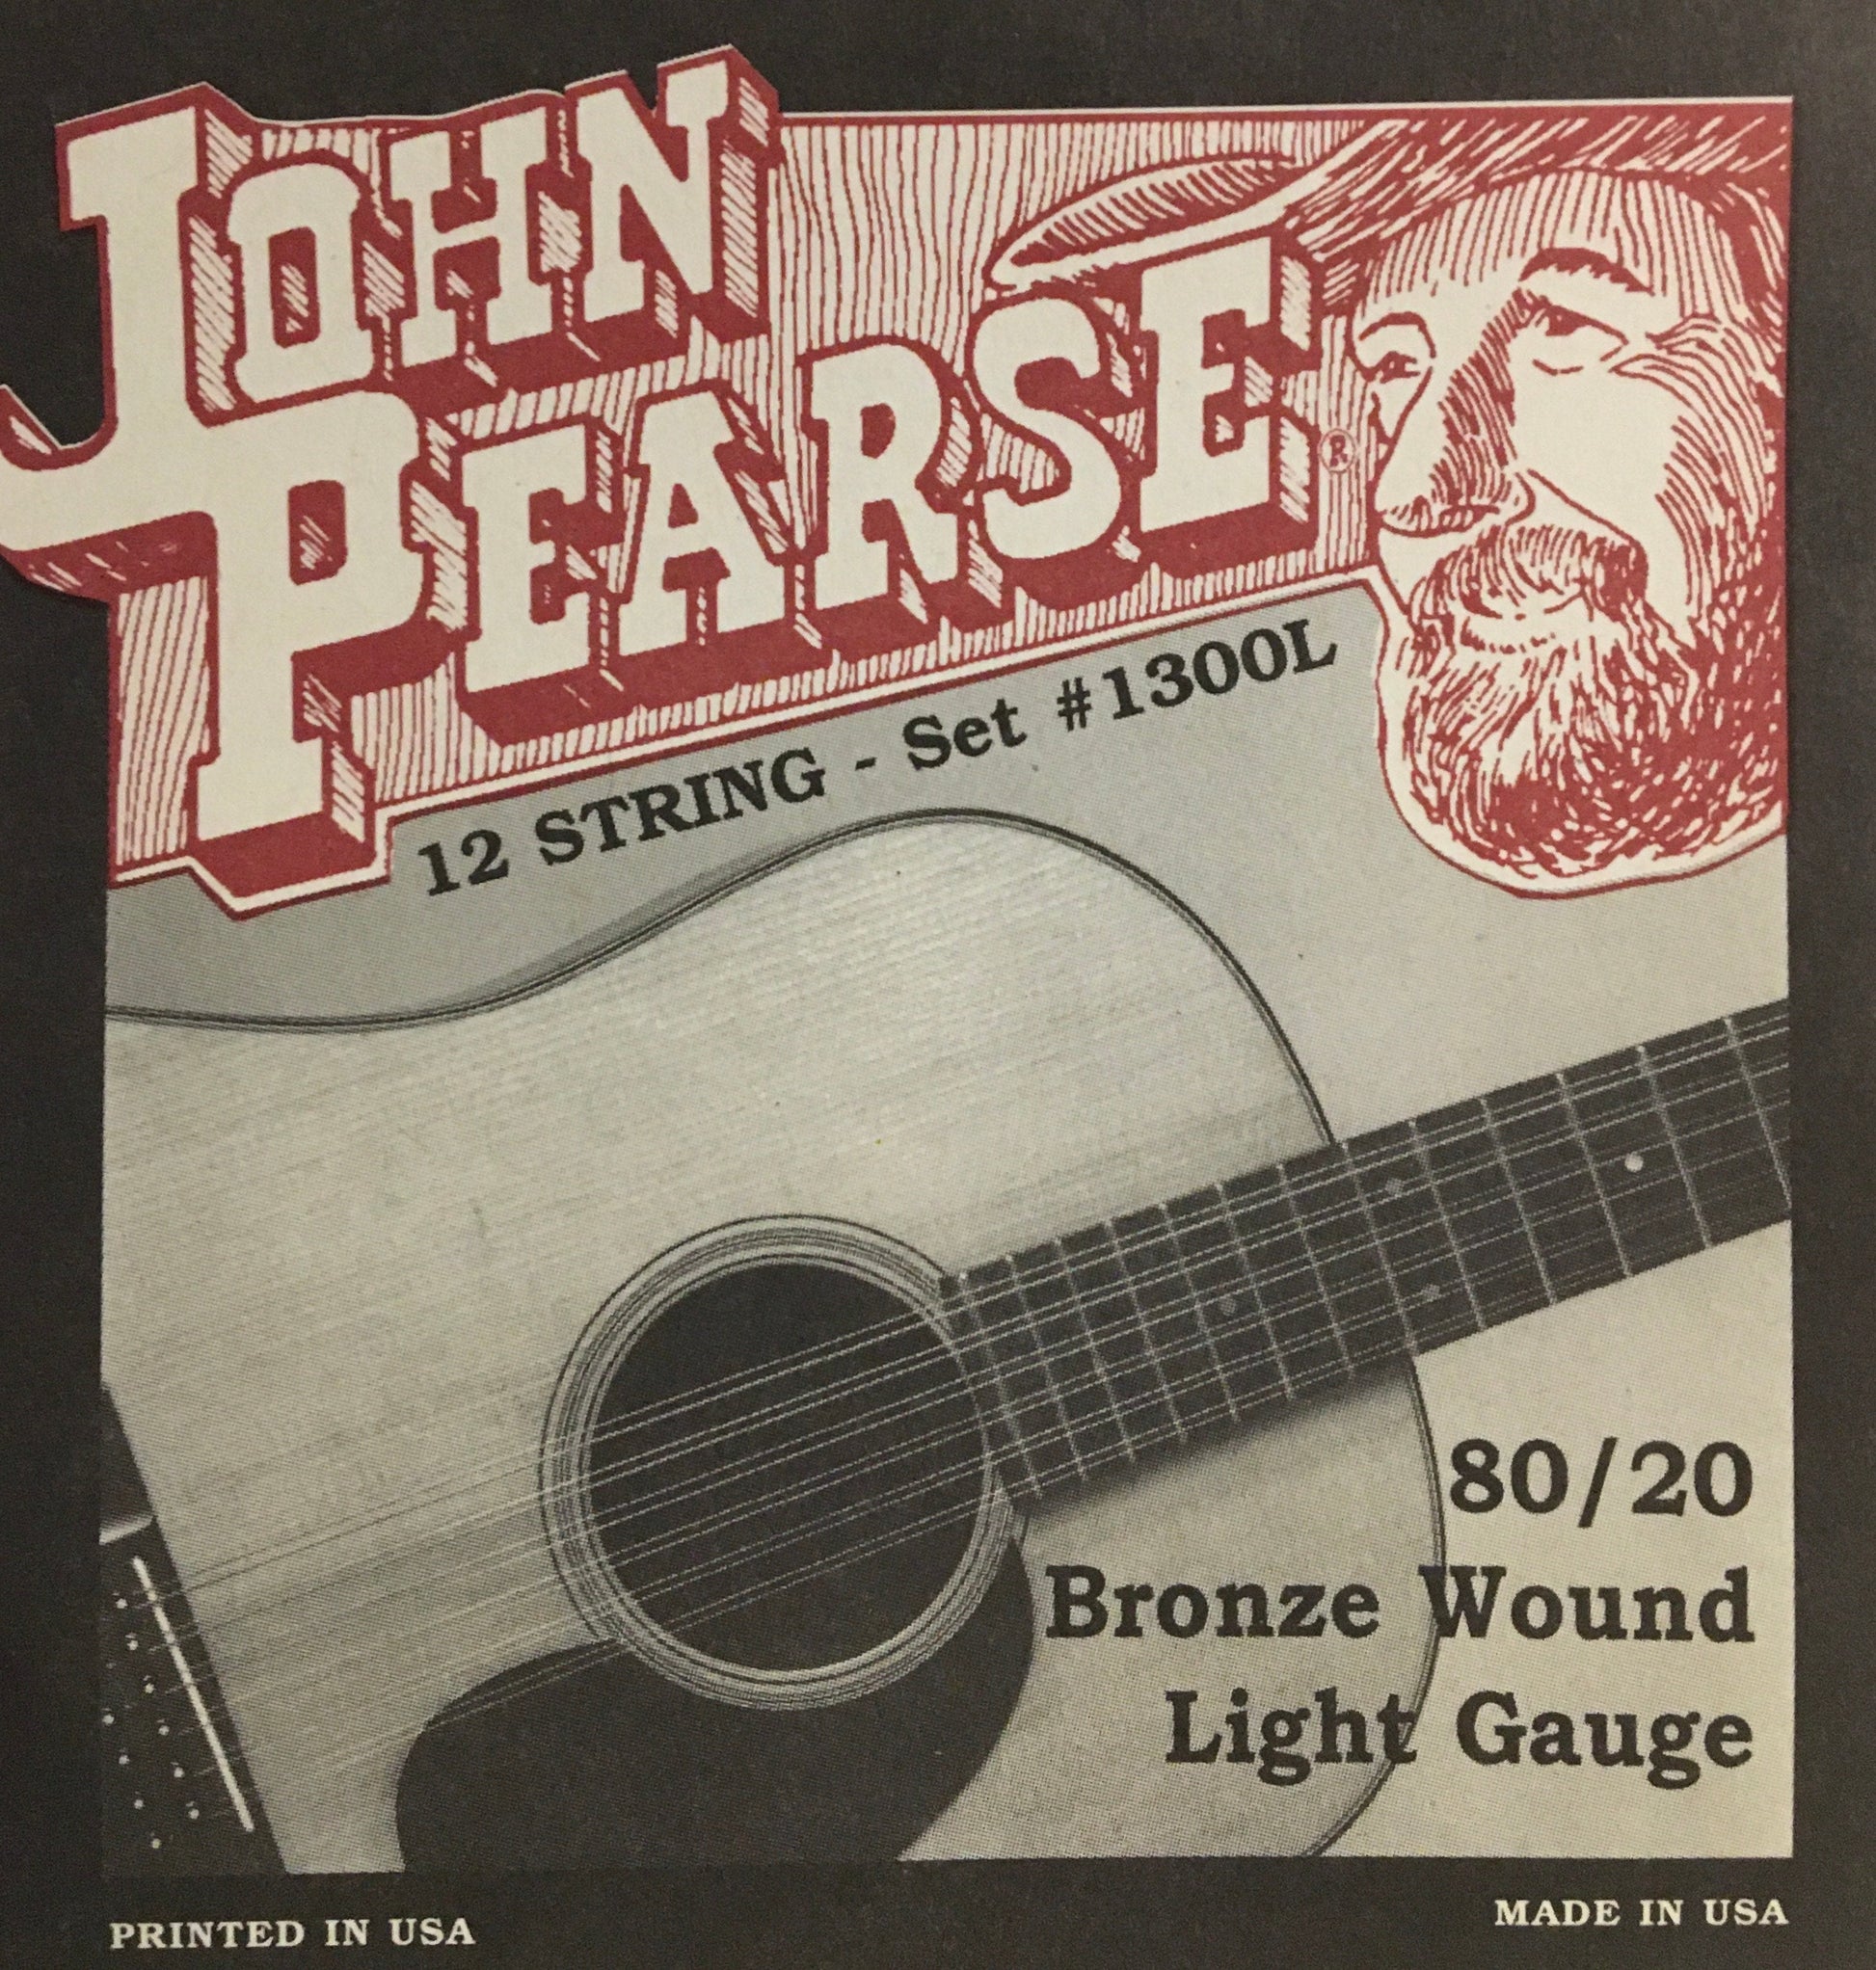 John Pearse 1300L 12-String 80/20 Bronze Wound Acoustic Guitar Set Strings, Bows & More